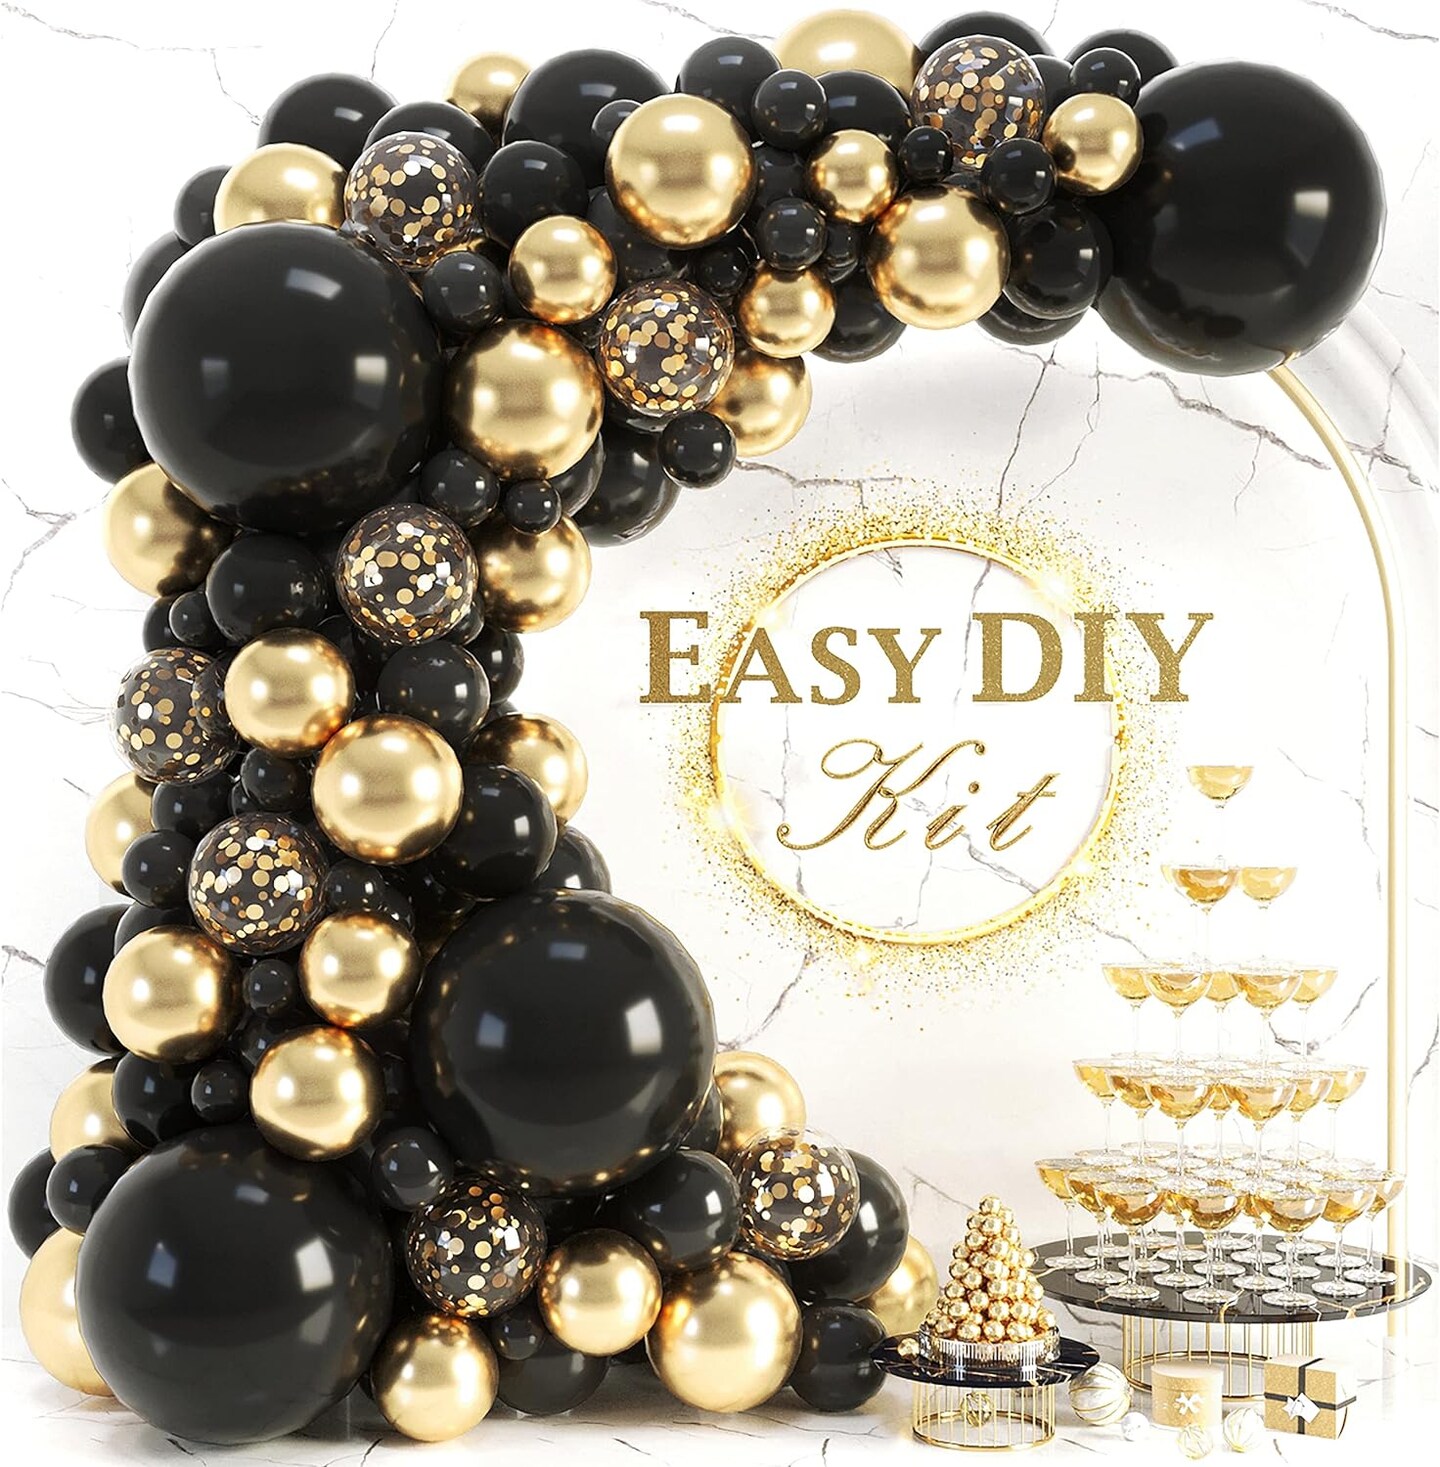 ALL-IN-1 Black and Gold Balloon Garland Kit &#x26; Arch &#x2013; Black Gold Balloons Party Decorations &#x2013; Balloon Arch for Gold and Black Birthday, Graduation, New Years, NYE, Retirement, Wedding, Anniversary